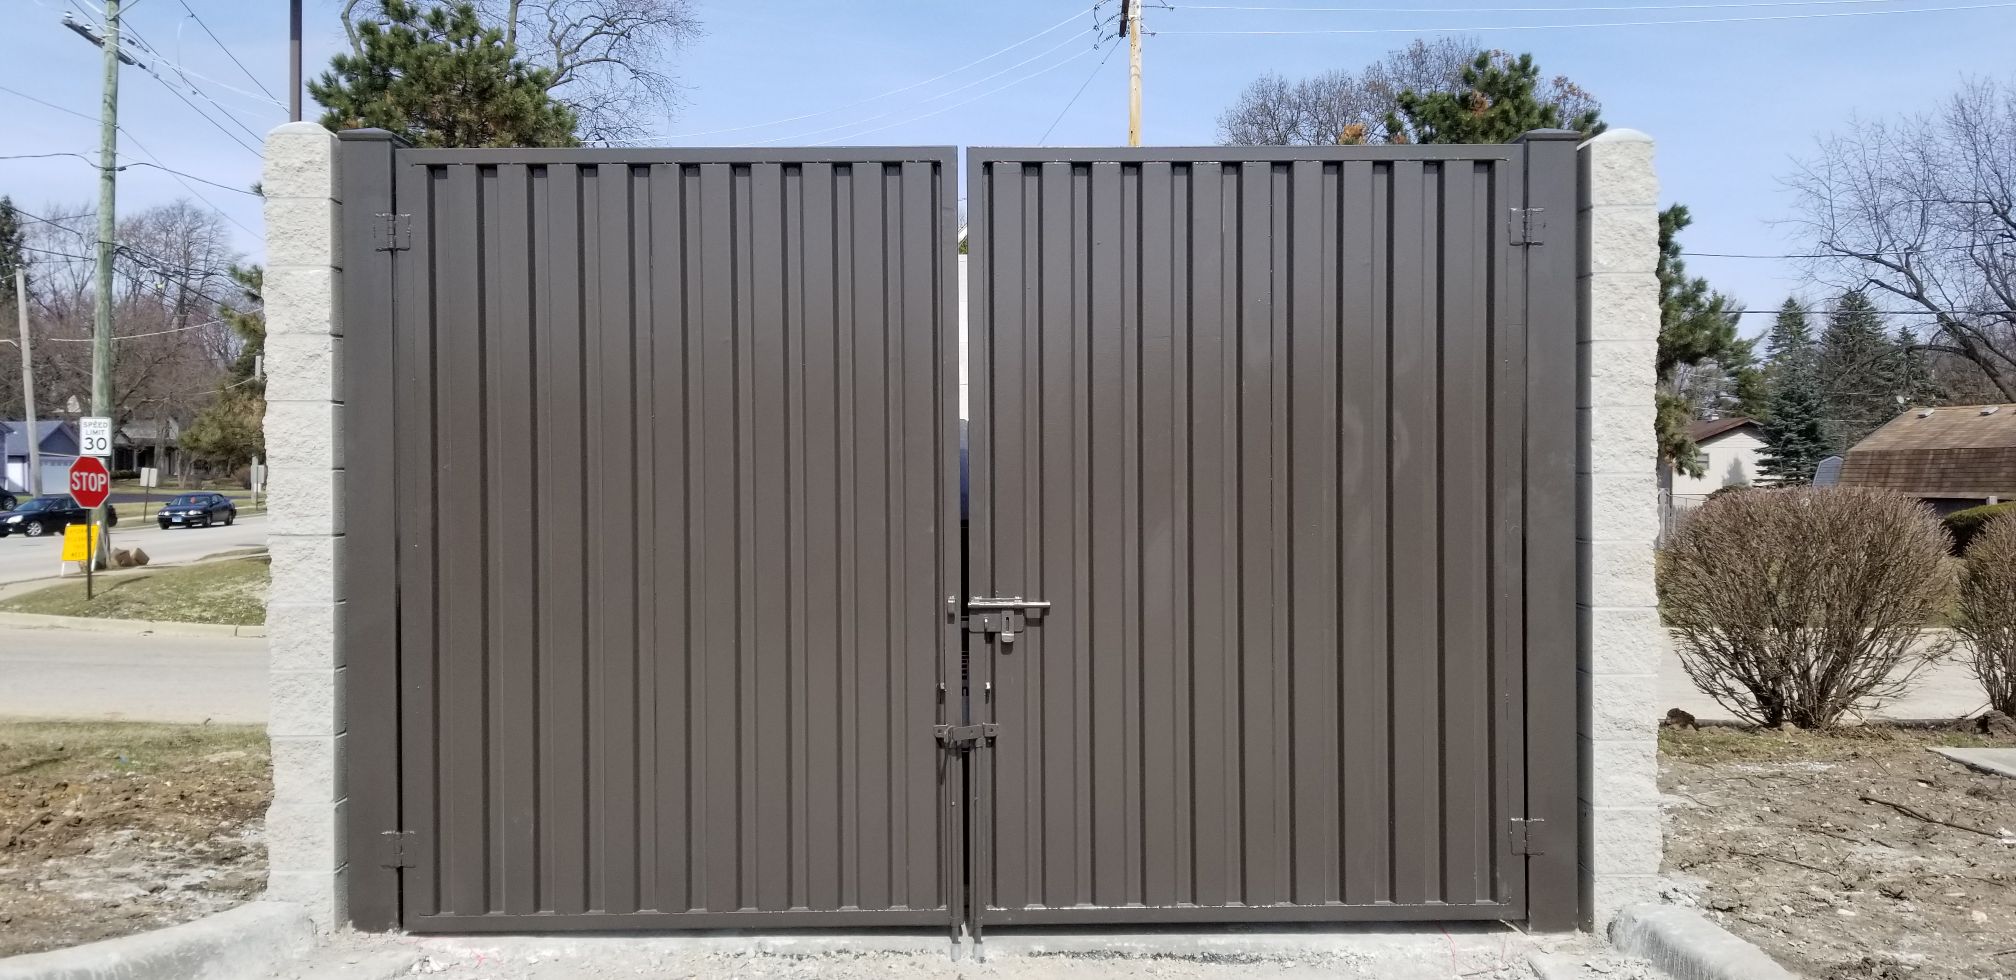 How to Build a Screening Fence